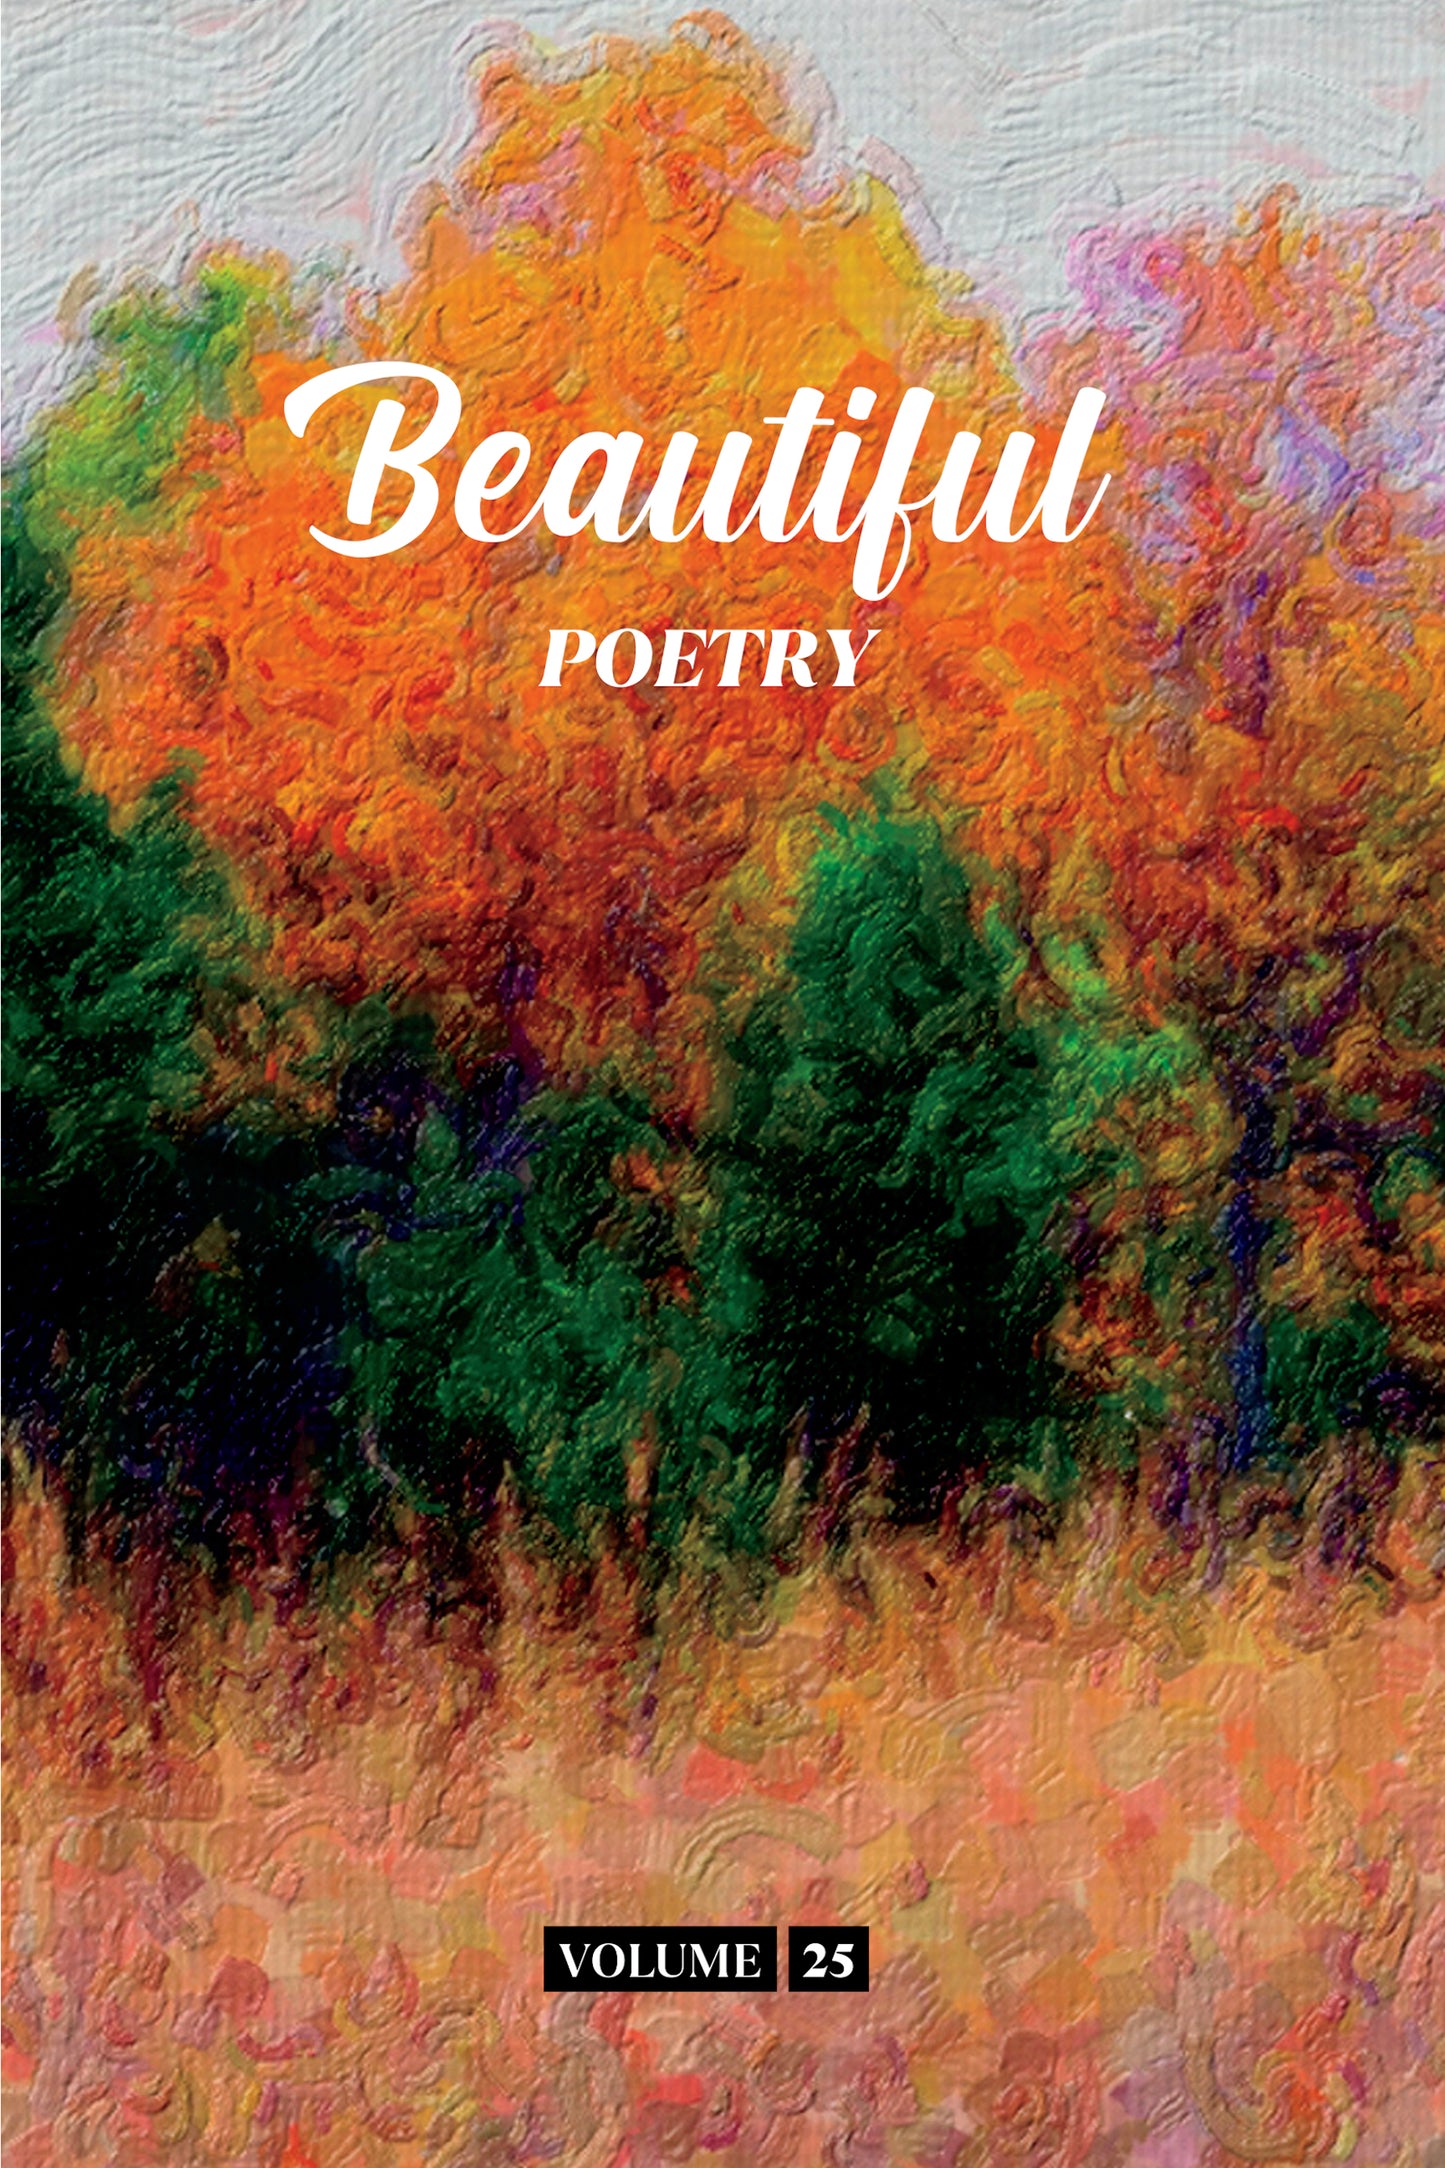 Beautiful Poetry (Volume 25) - Physical Book (Pre-Order)